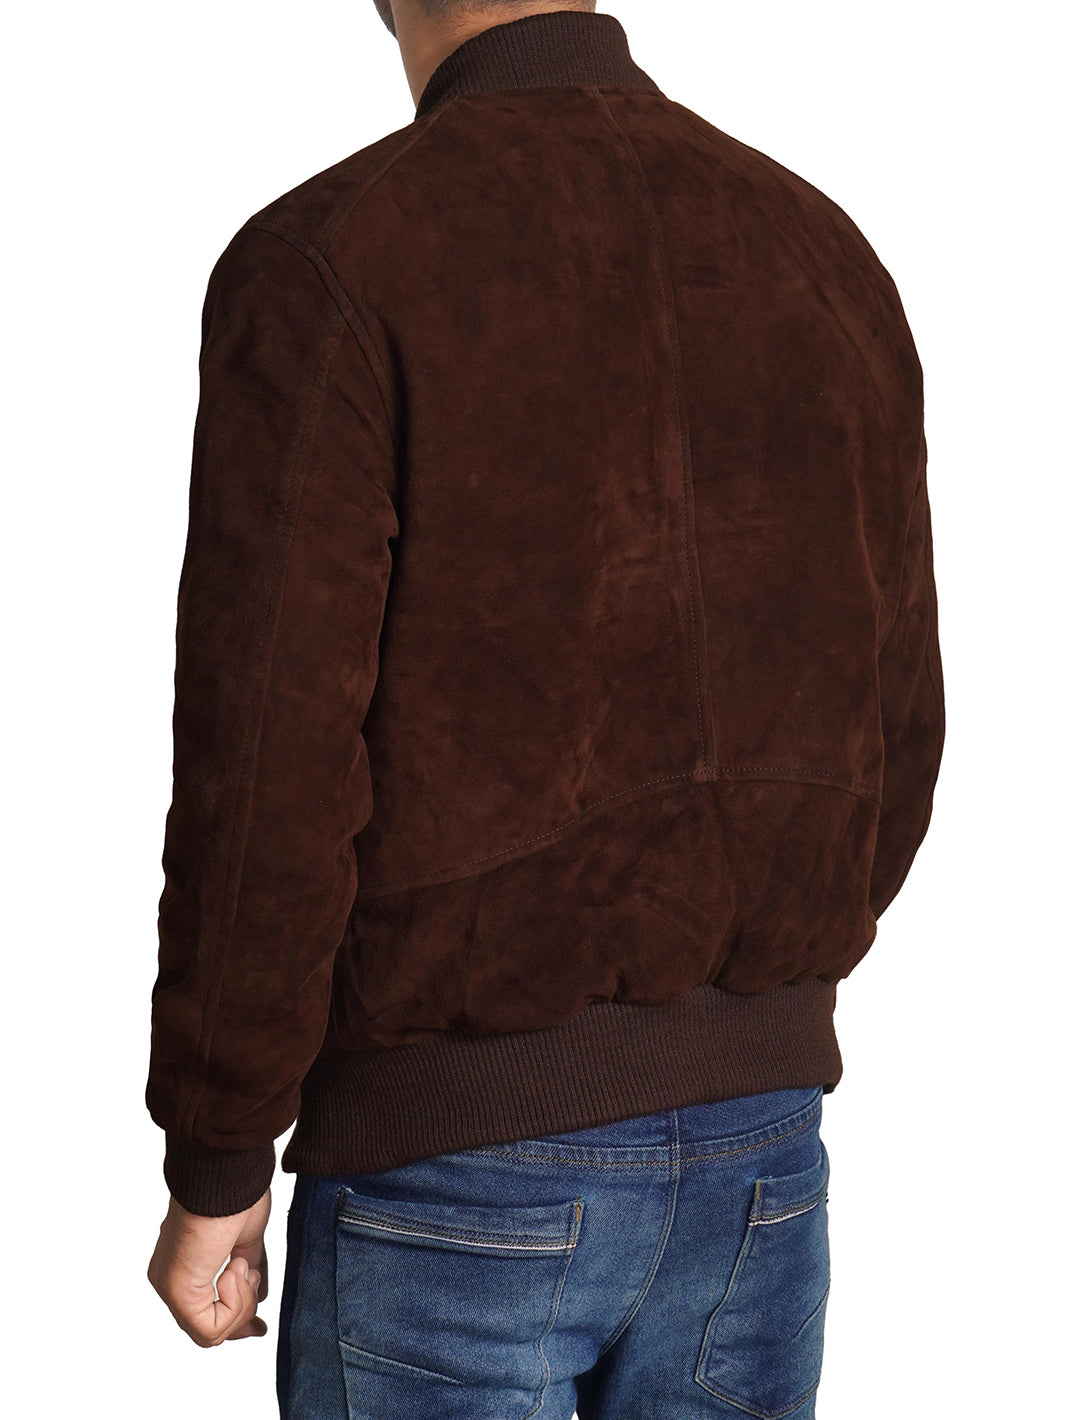 Mens Suede Leather jacket